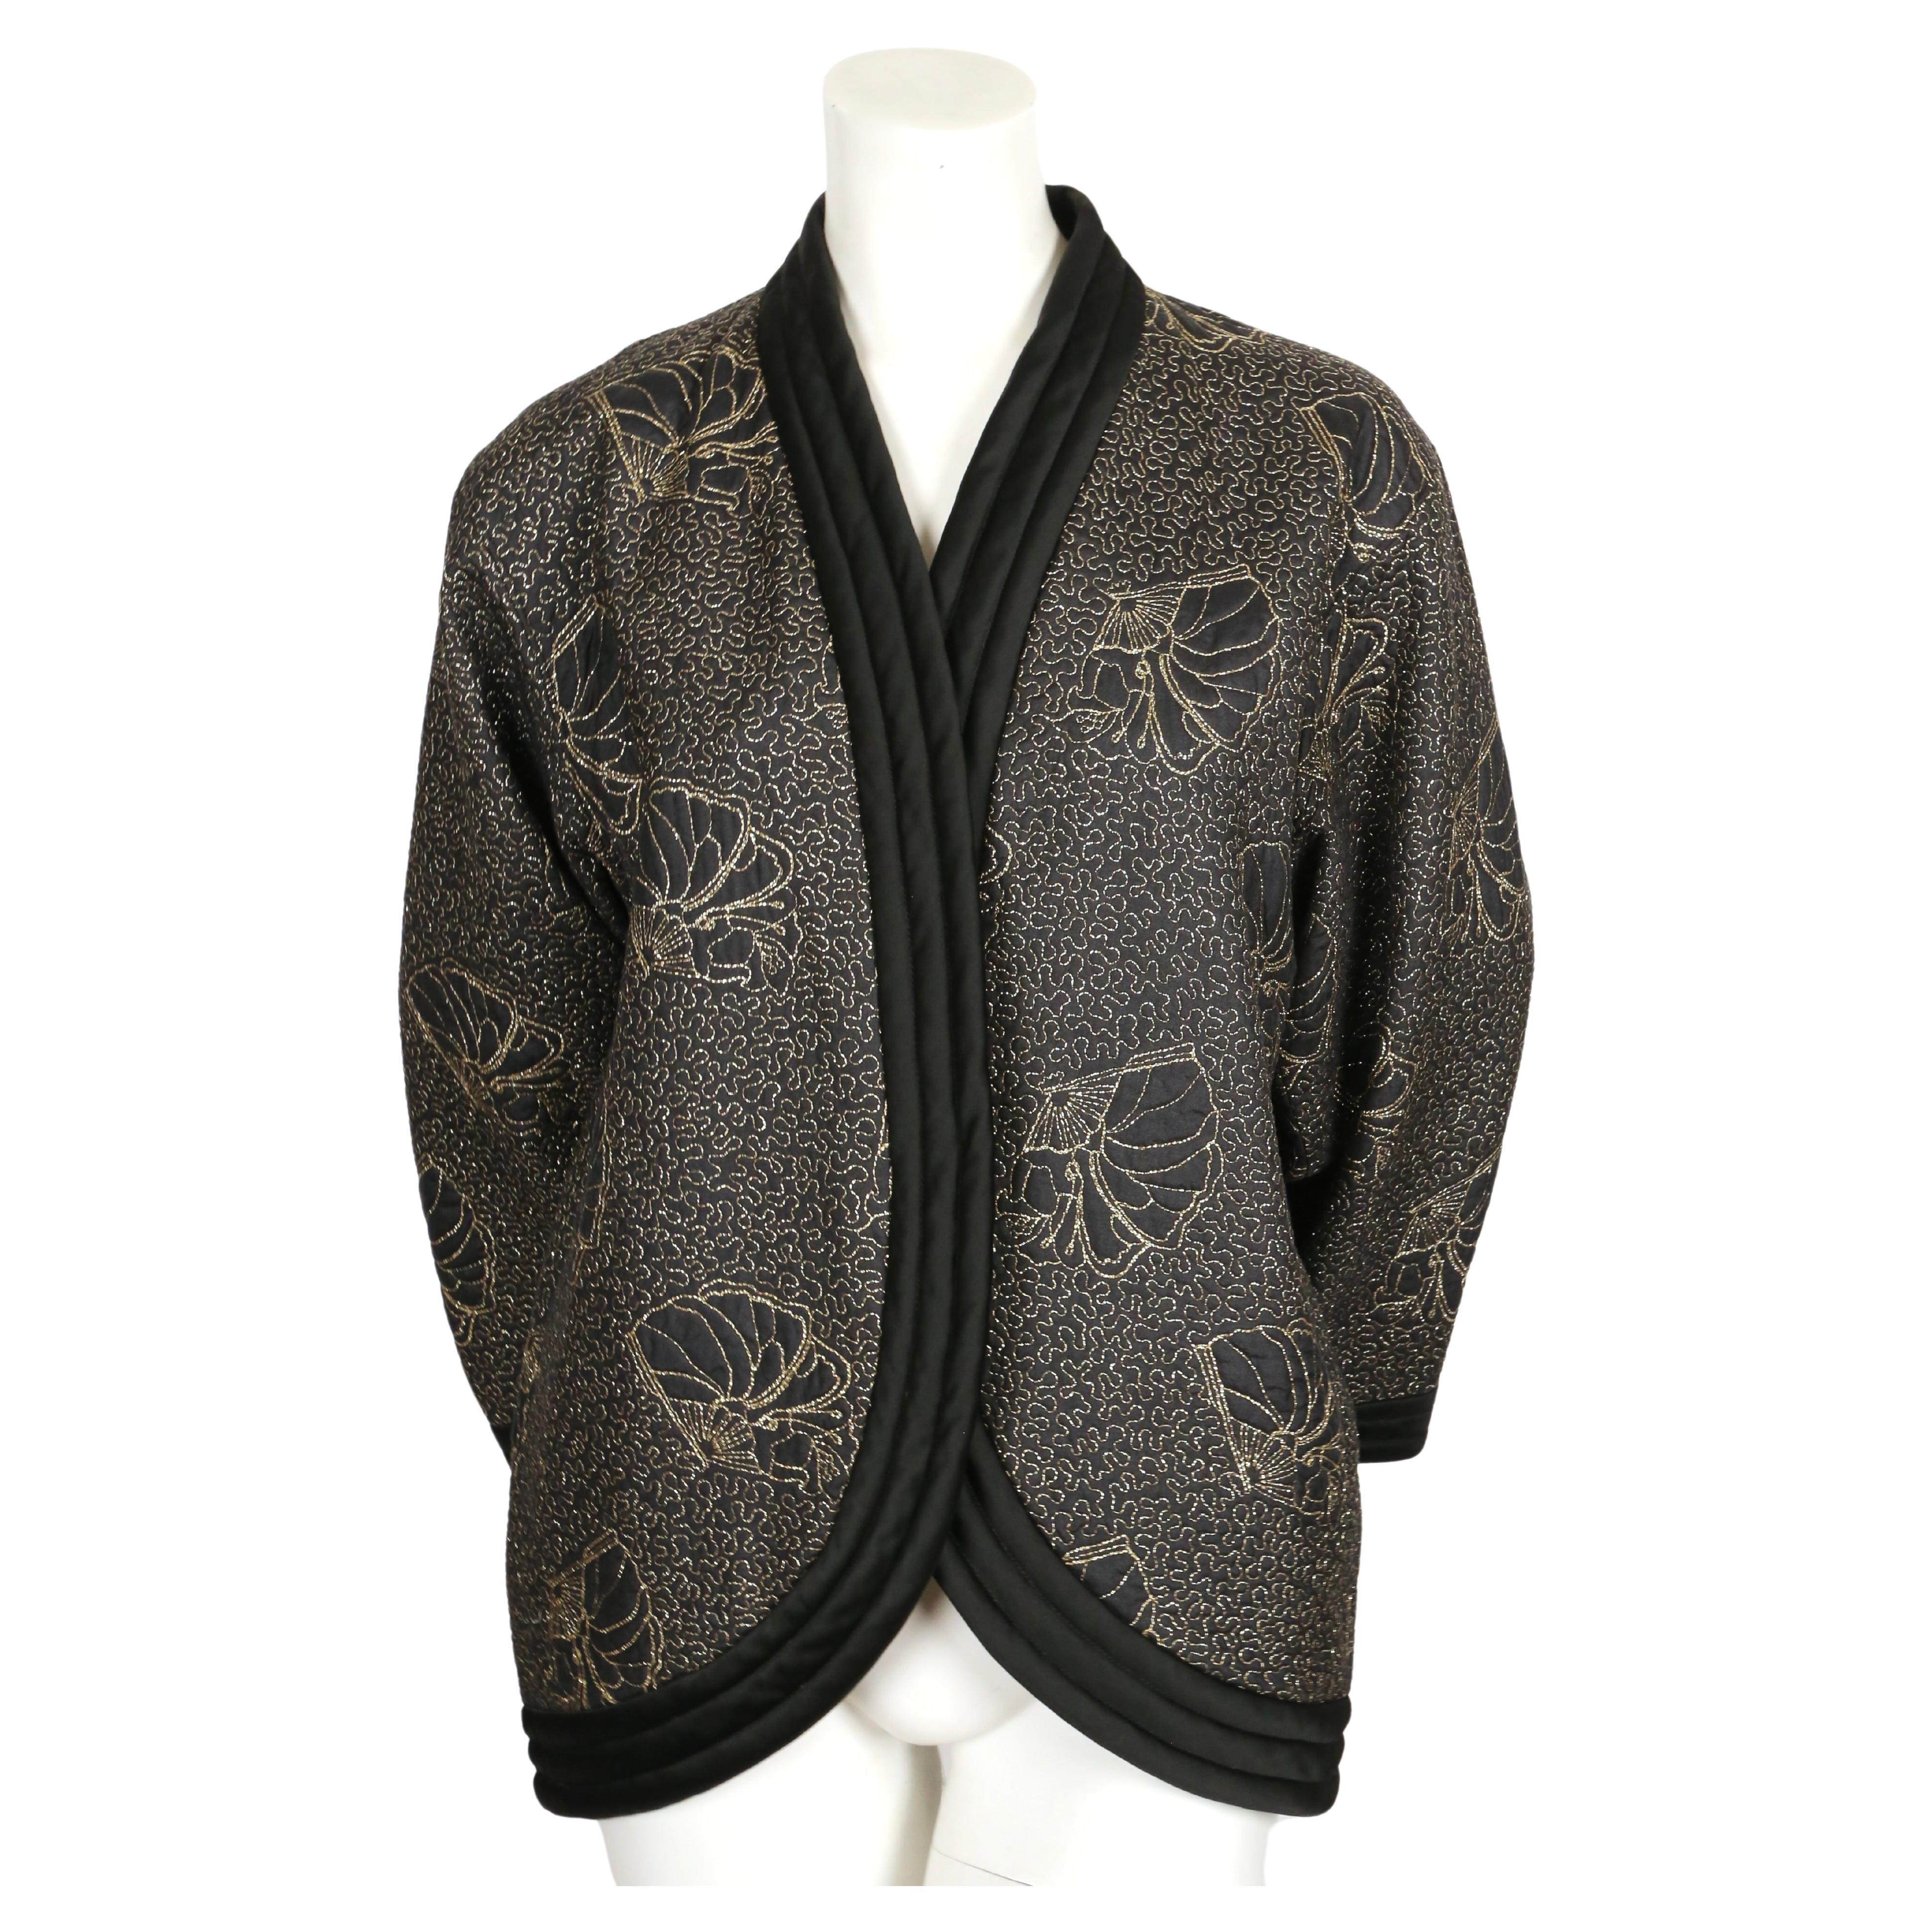 Black, satin kimono jacket with metallic-gold seashell embroidery designed by Yves Saint Laurent dating to 1979. Labeled a French 40 however this fits many sizes due to the oversized cut. Jacket was not clipped on size 2 mannequin. Approximate